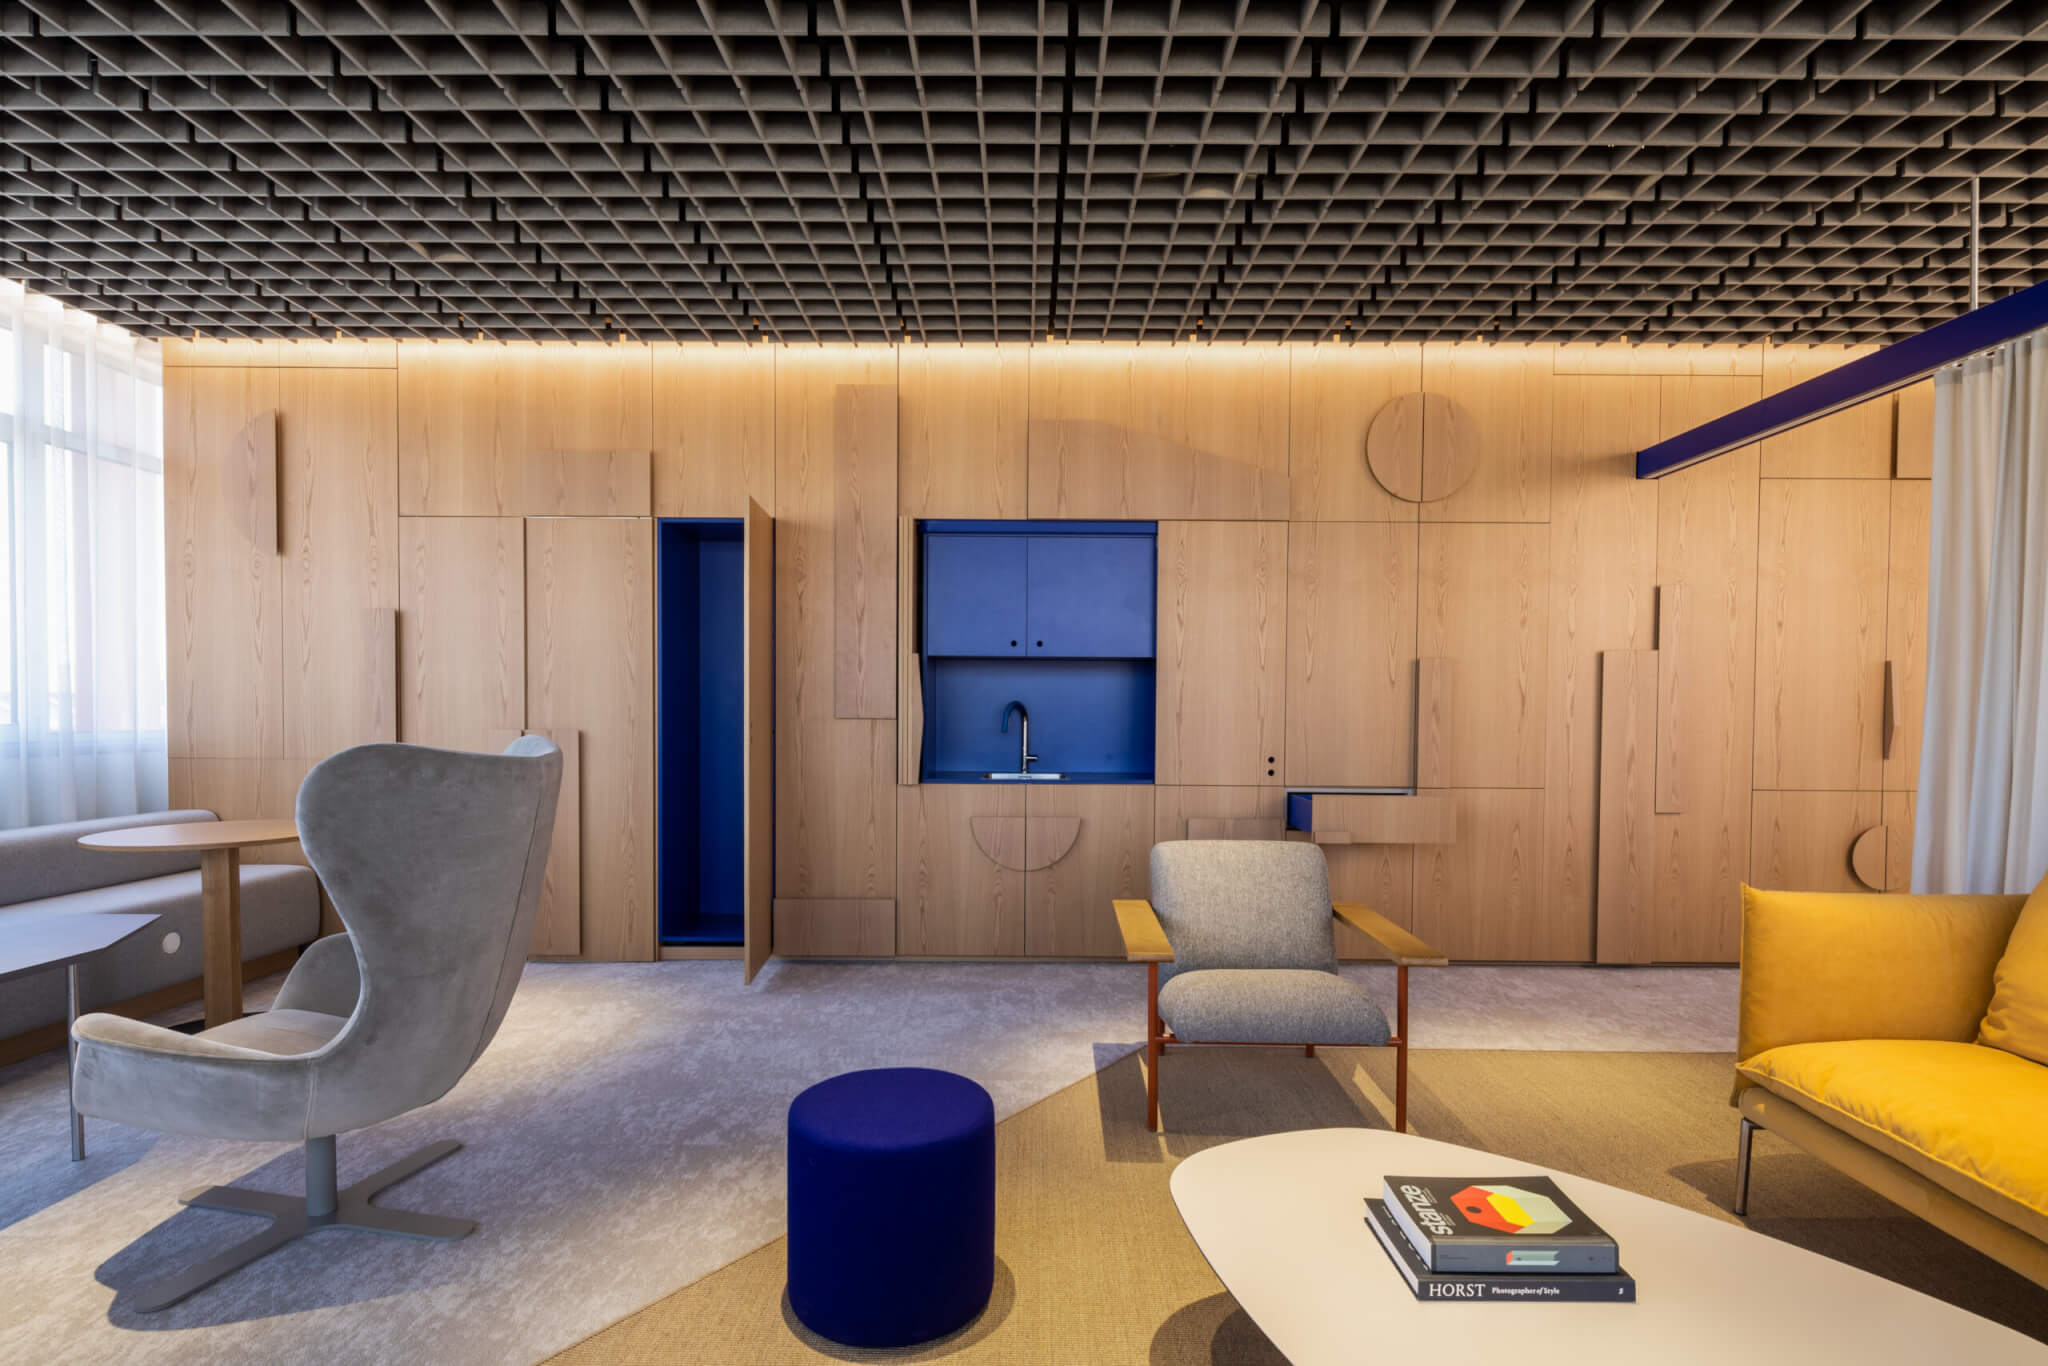 A lounge with a sound-absorbing grid ceiling. Thanks to the simple installation concept of the EchoGrid®, individual grid elements can be inserted into the specified grid structure without tools.